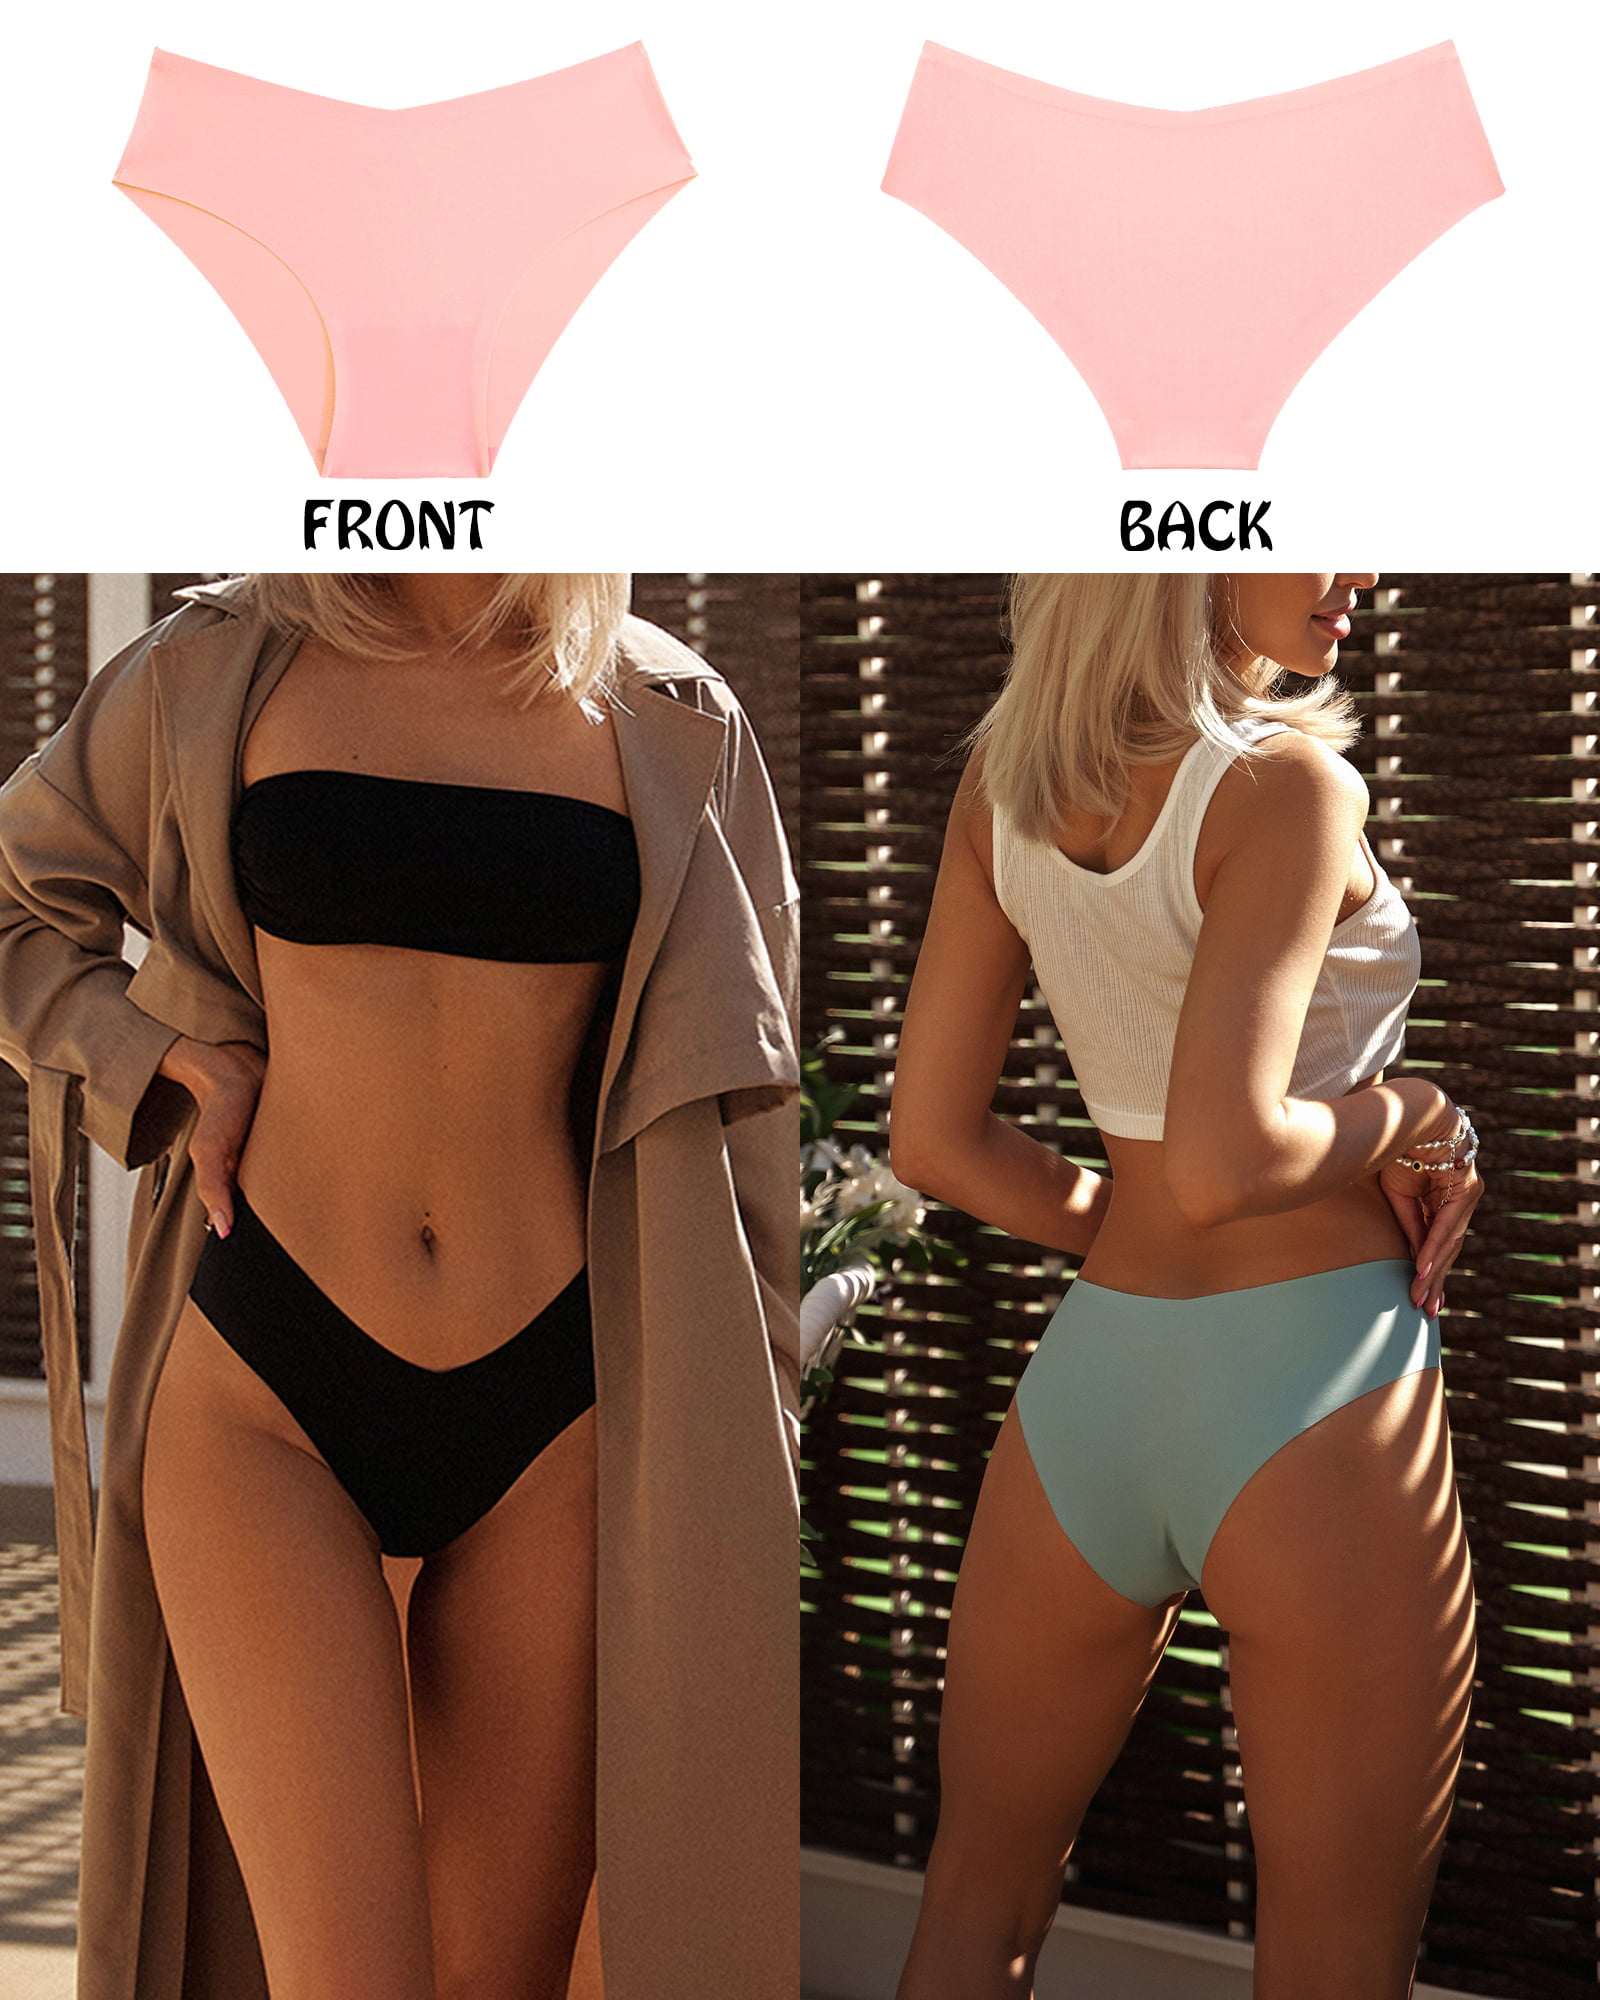 Women Seamless Hipster Underwear No Show Panties Invisibles Briefs Soft  Stretch Bikini Underwears Cute T-back for Girl 6866